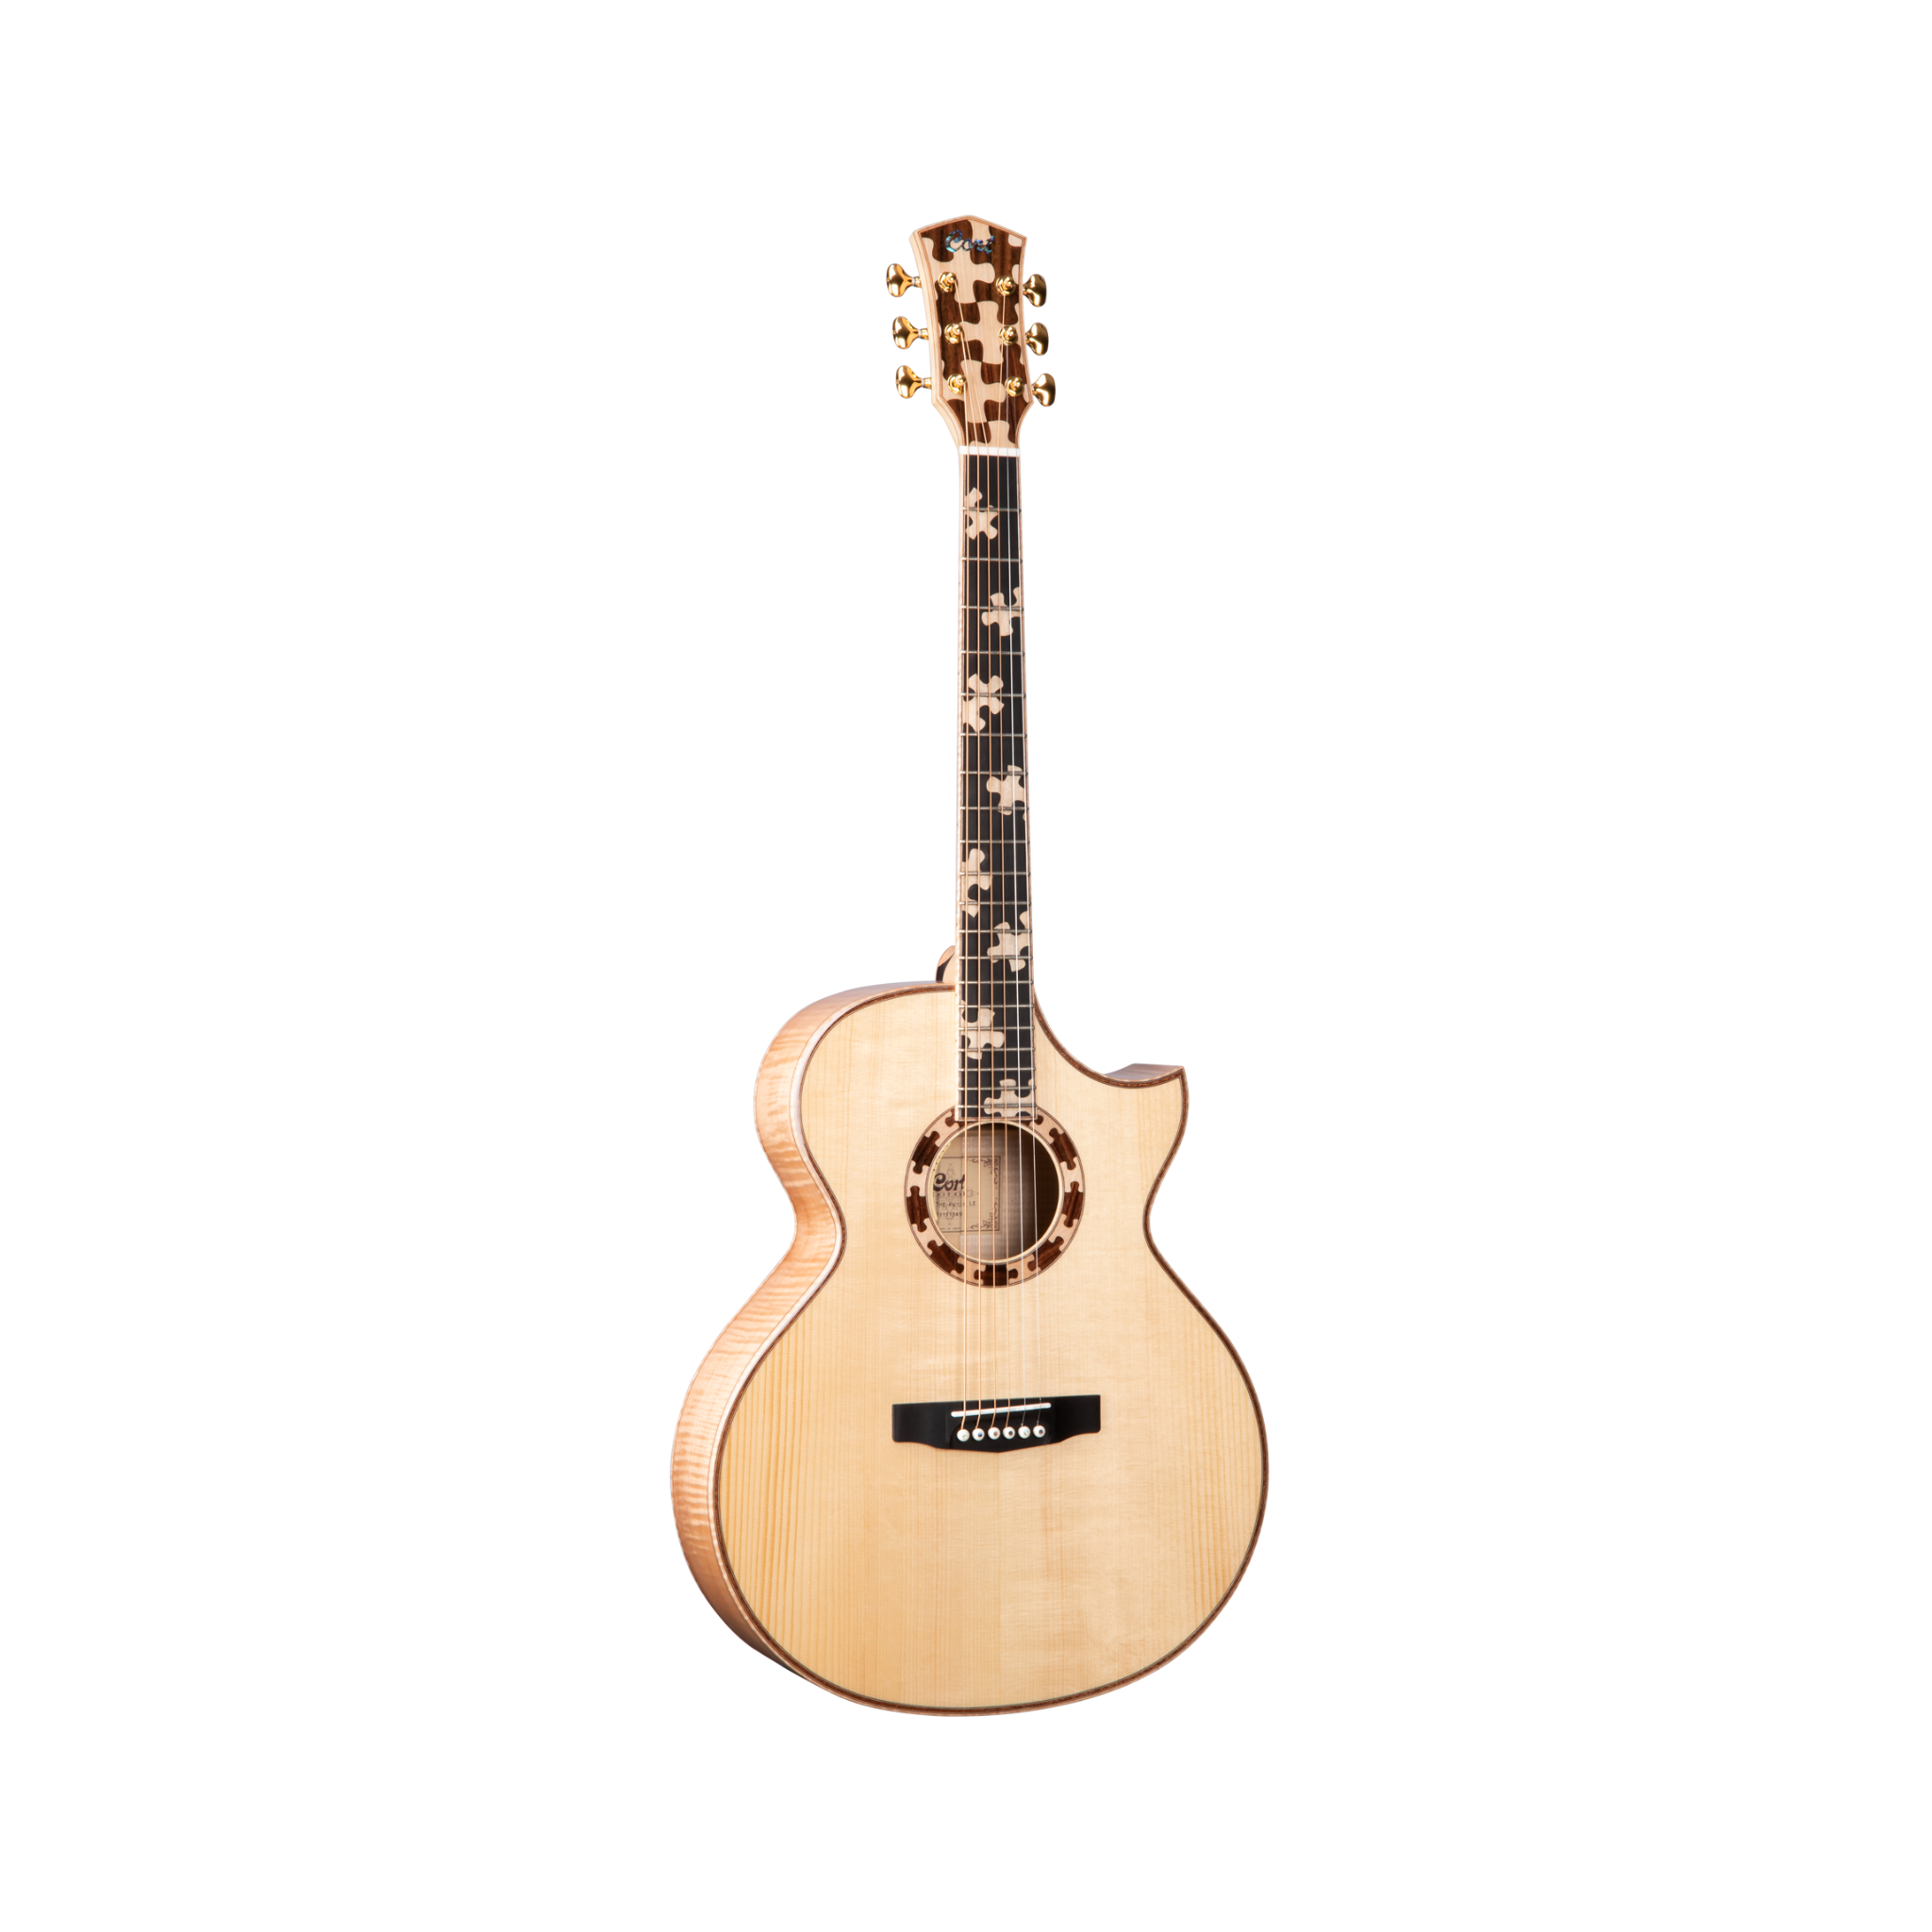 Cort The Puzzle LE Limited Edition Acoustic Guitar